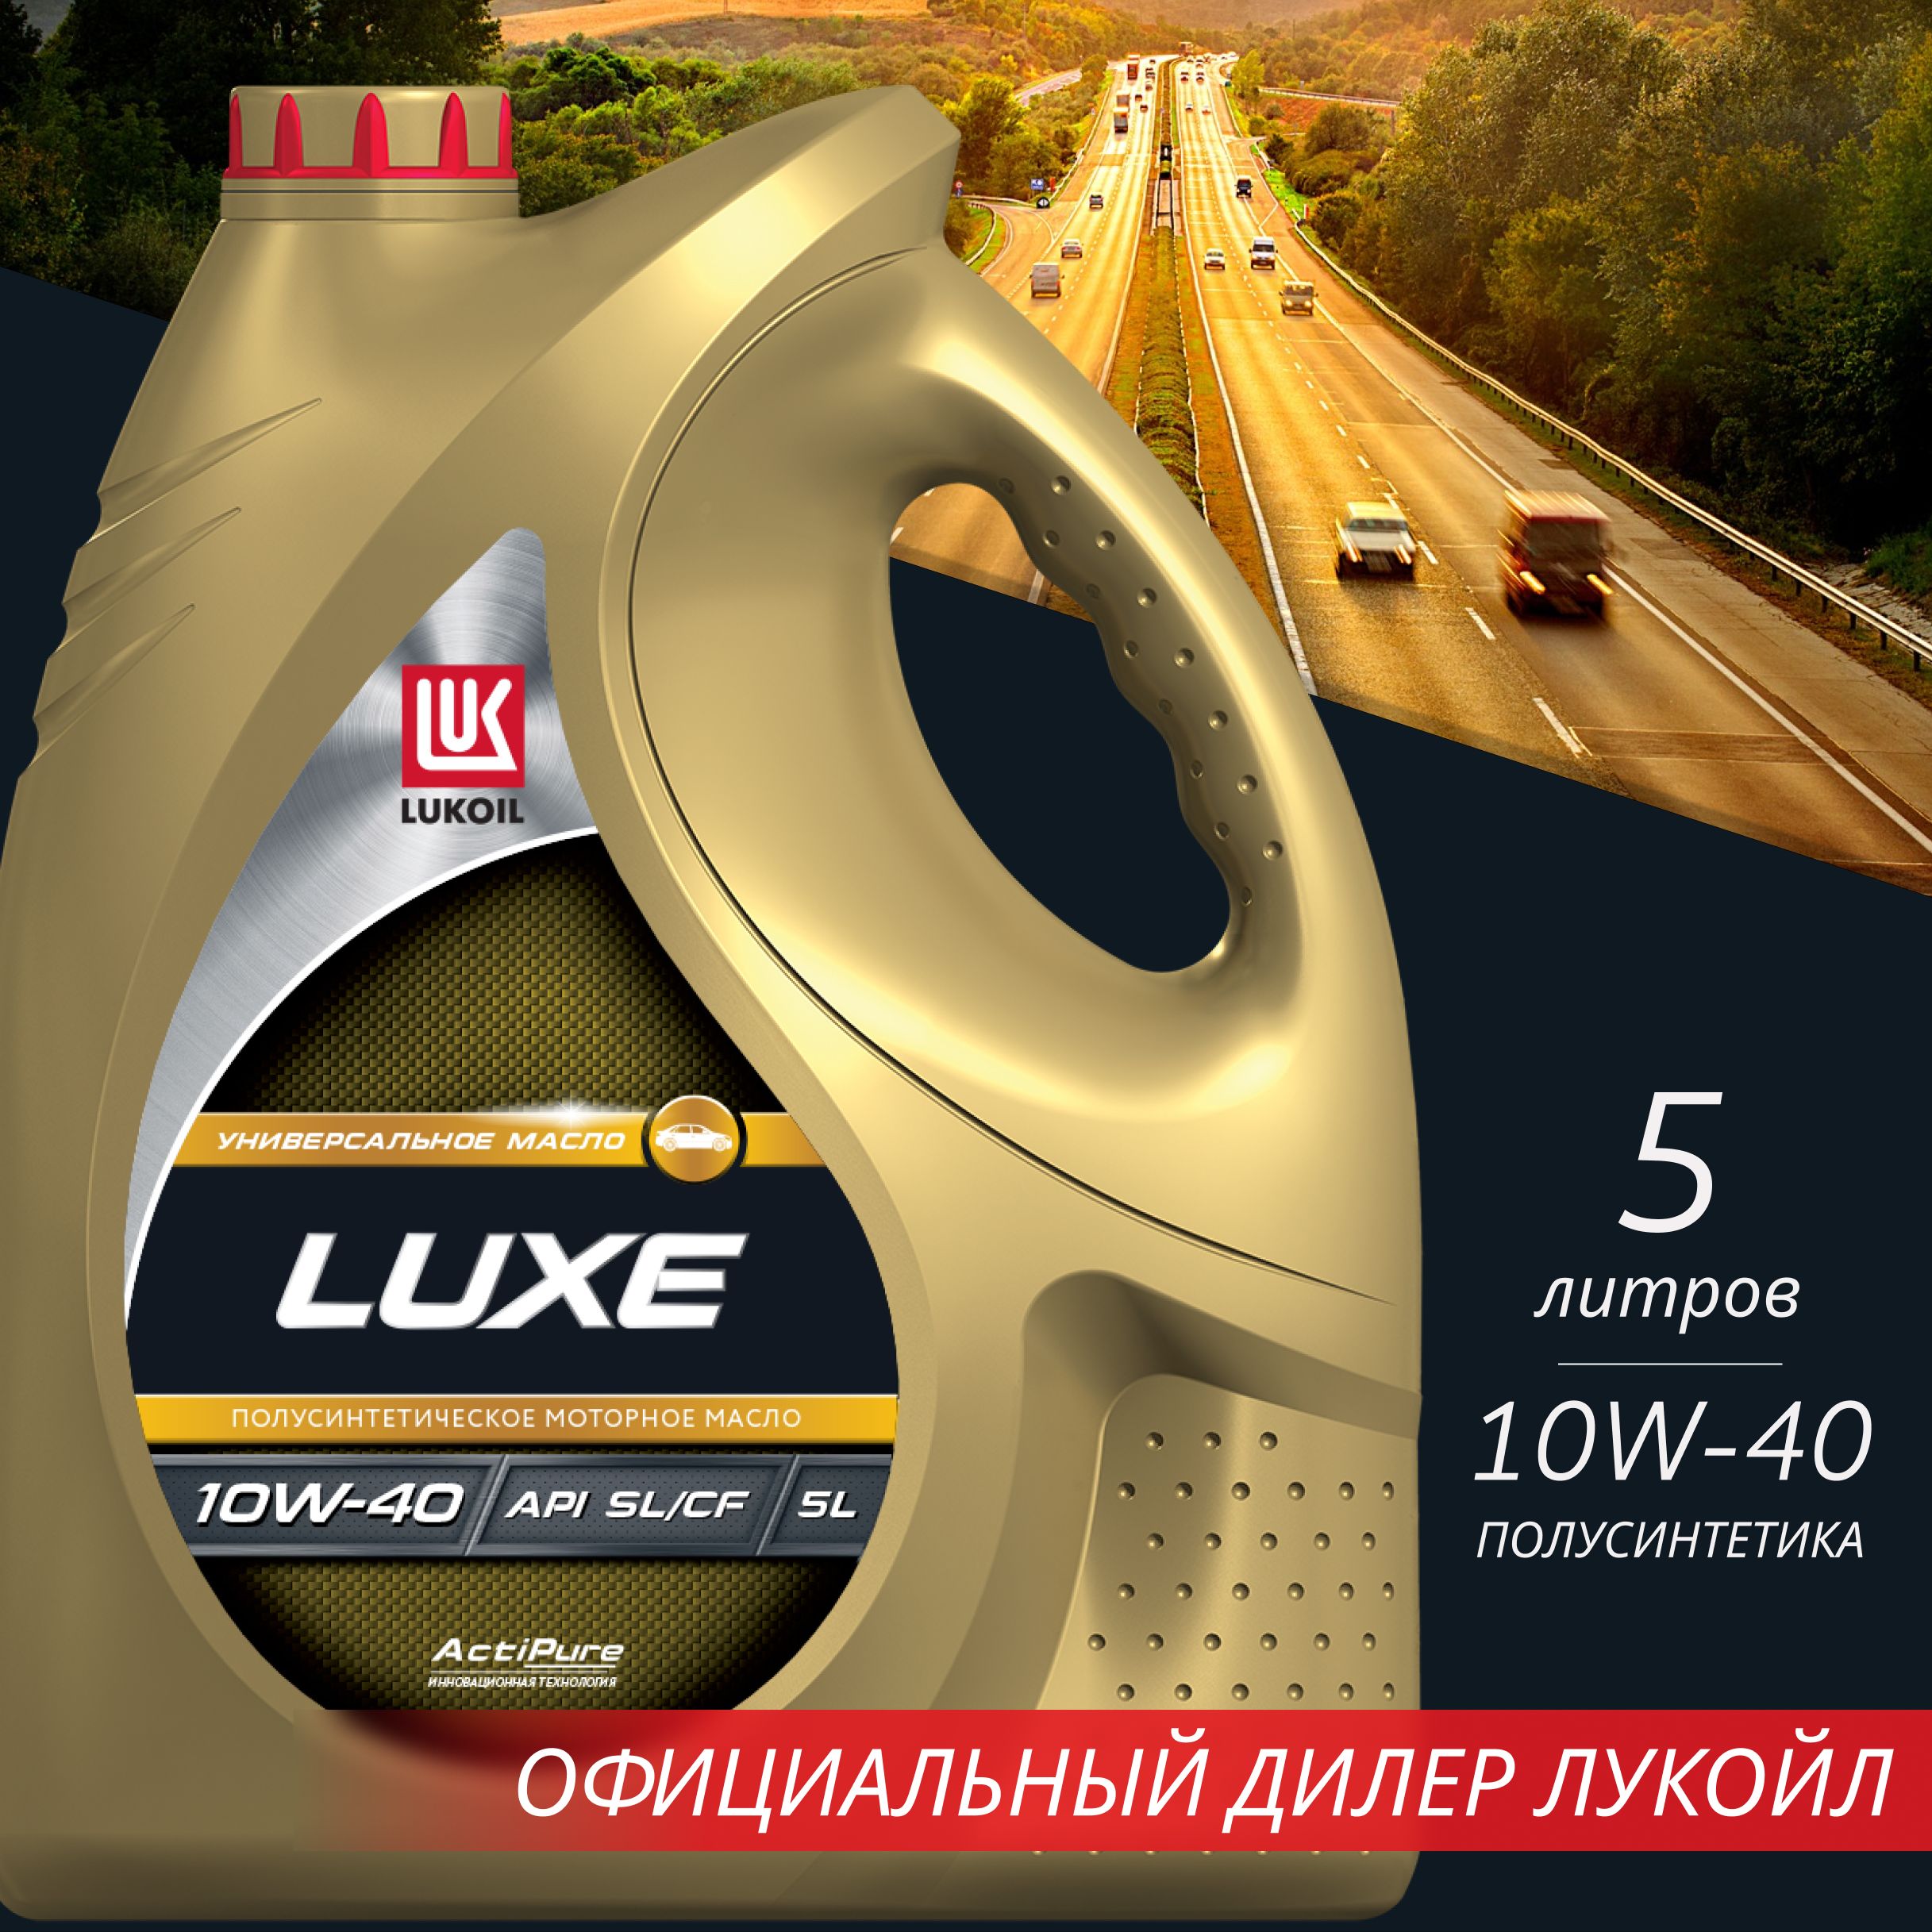 Масло Luxe реклама. Масло Luxe 10w 40 полусинтетика отзывы.